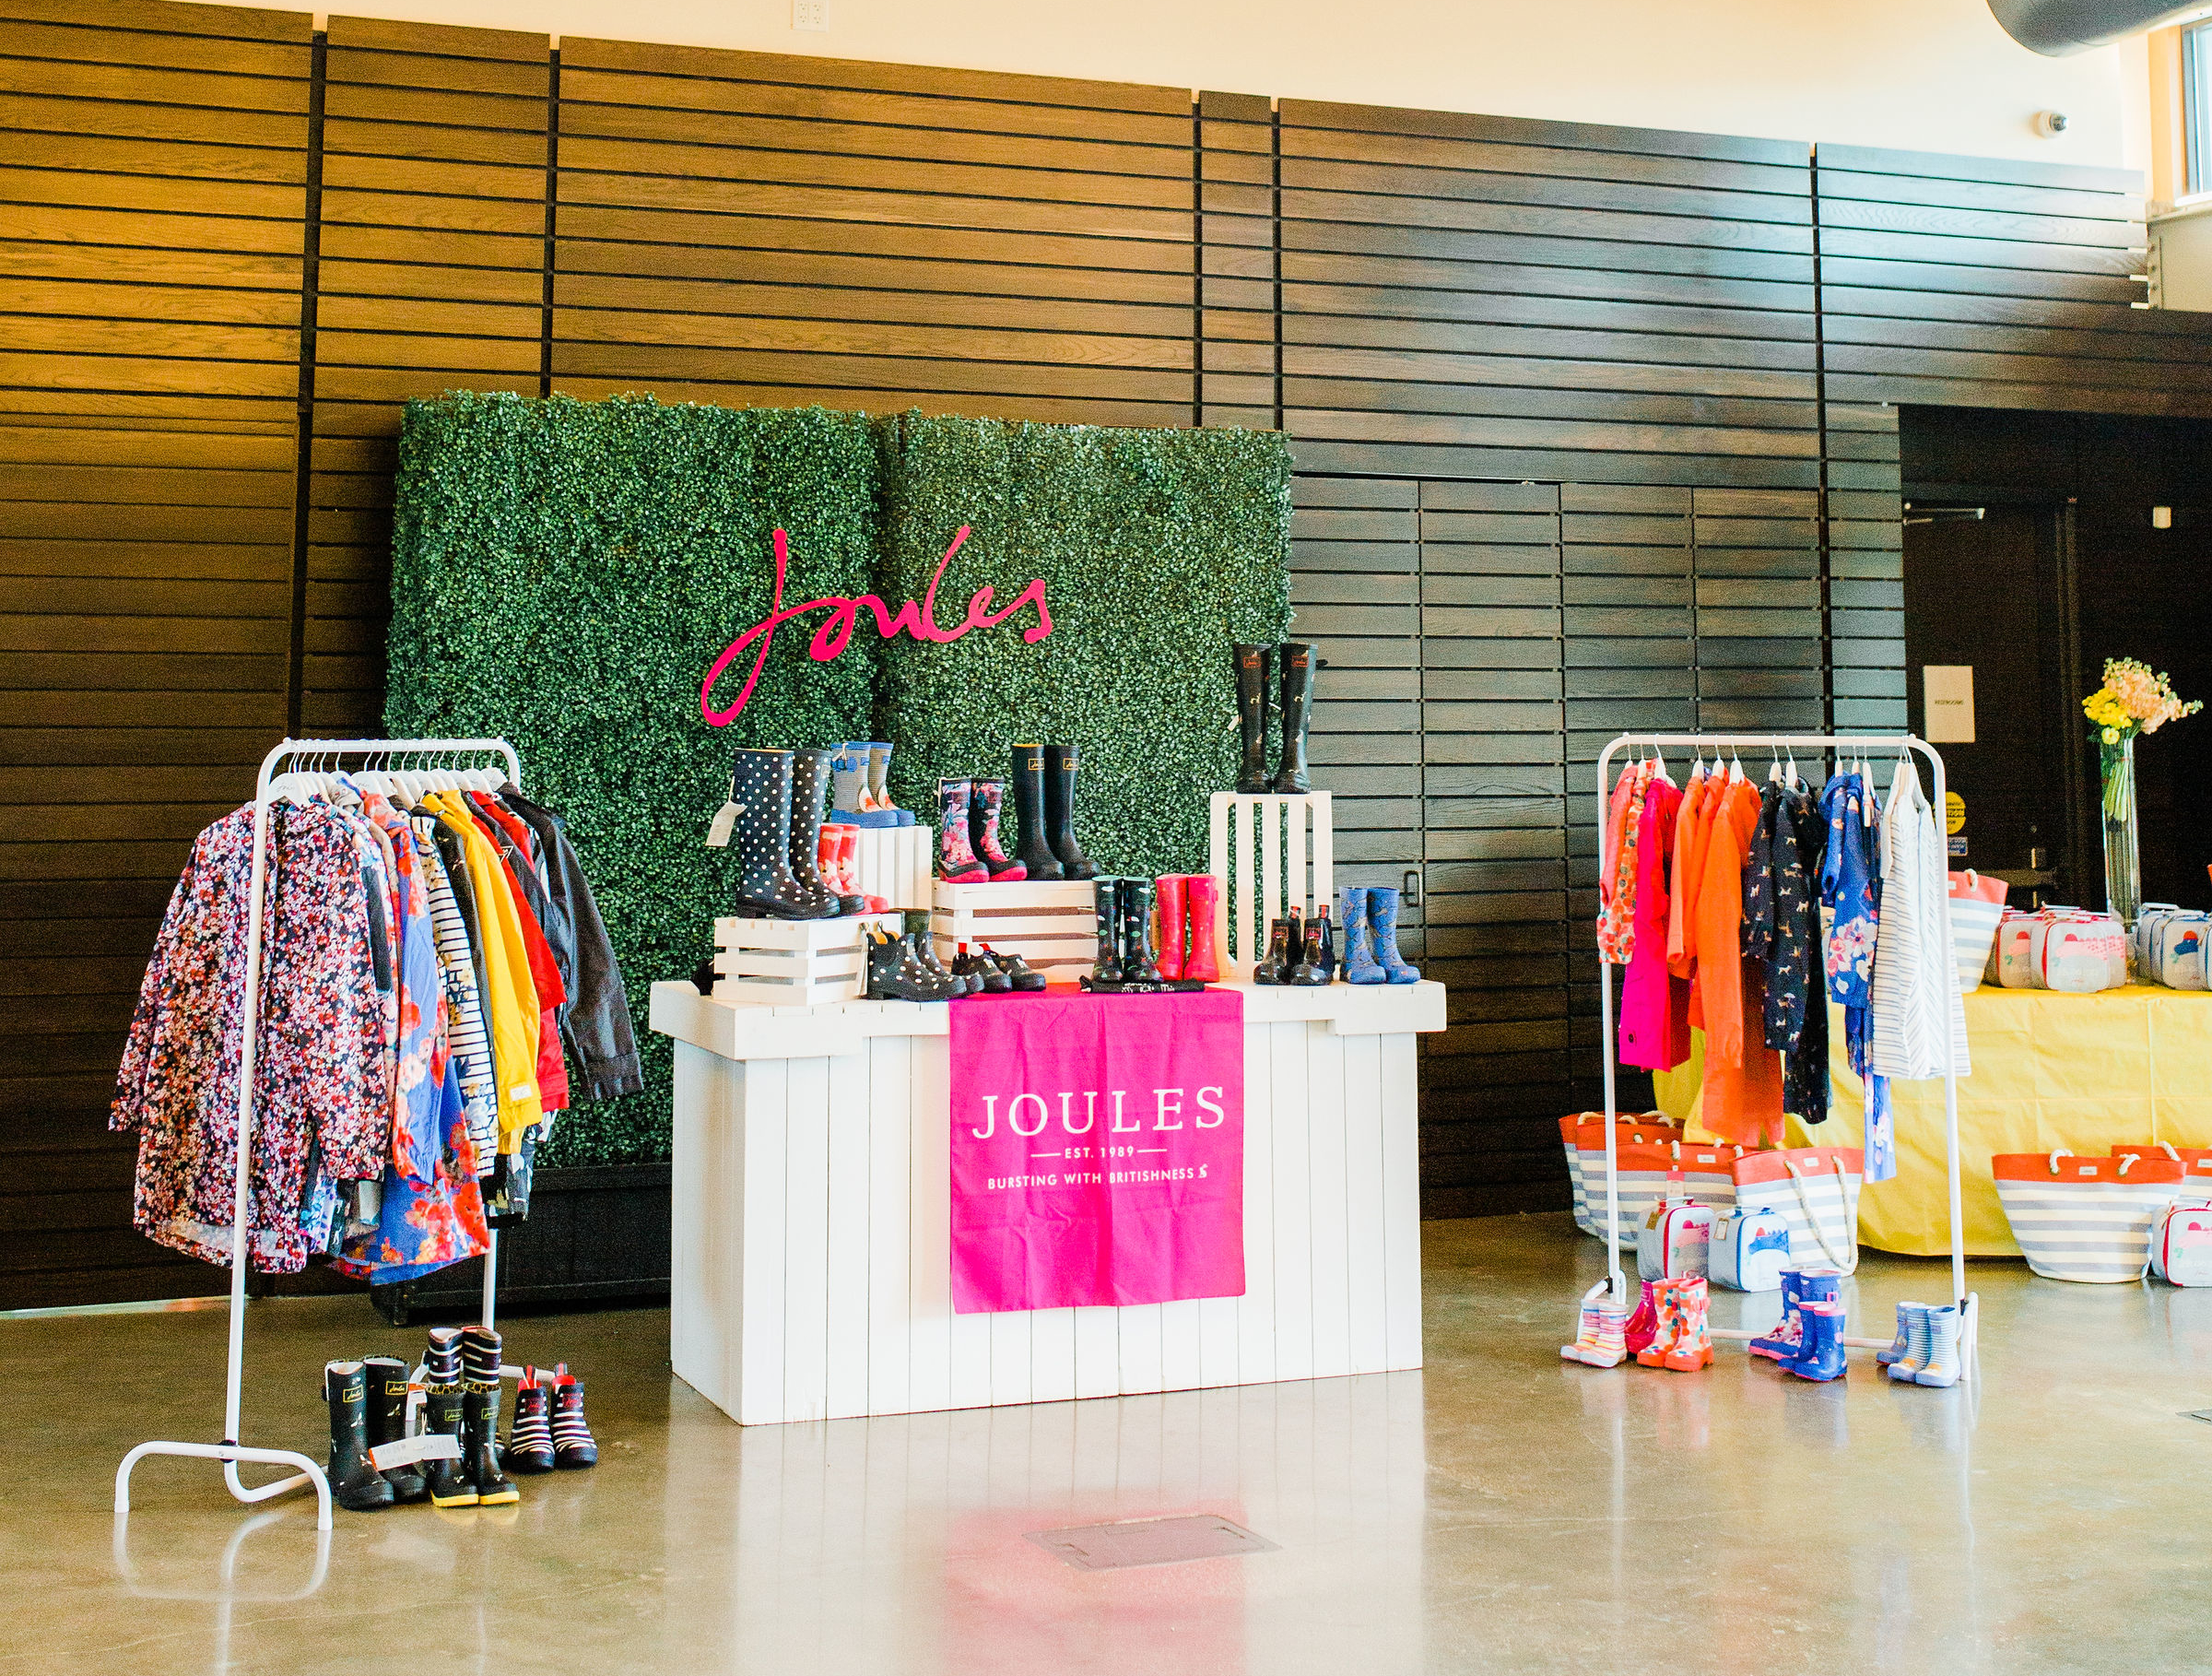 Joules pop up in Houston